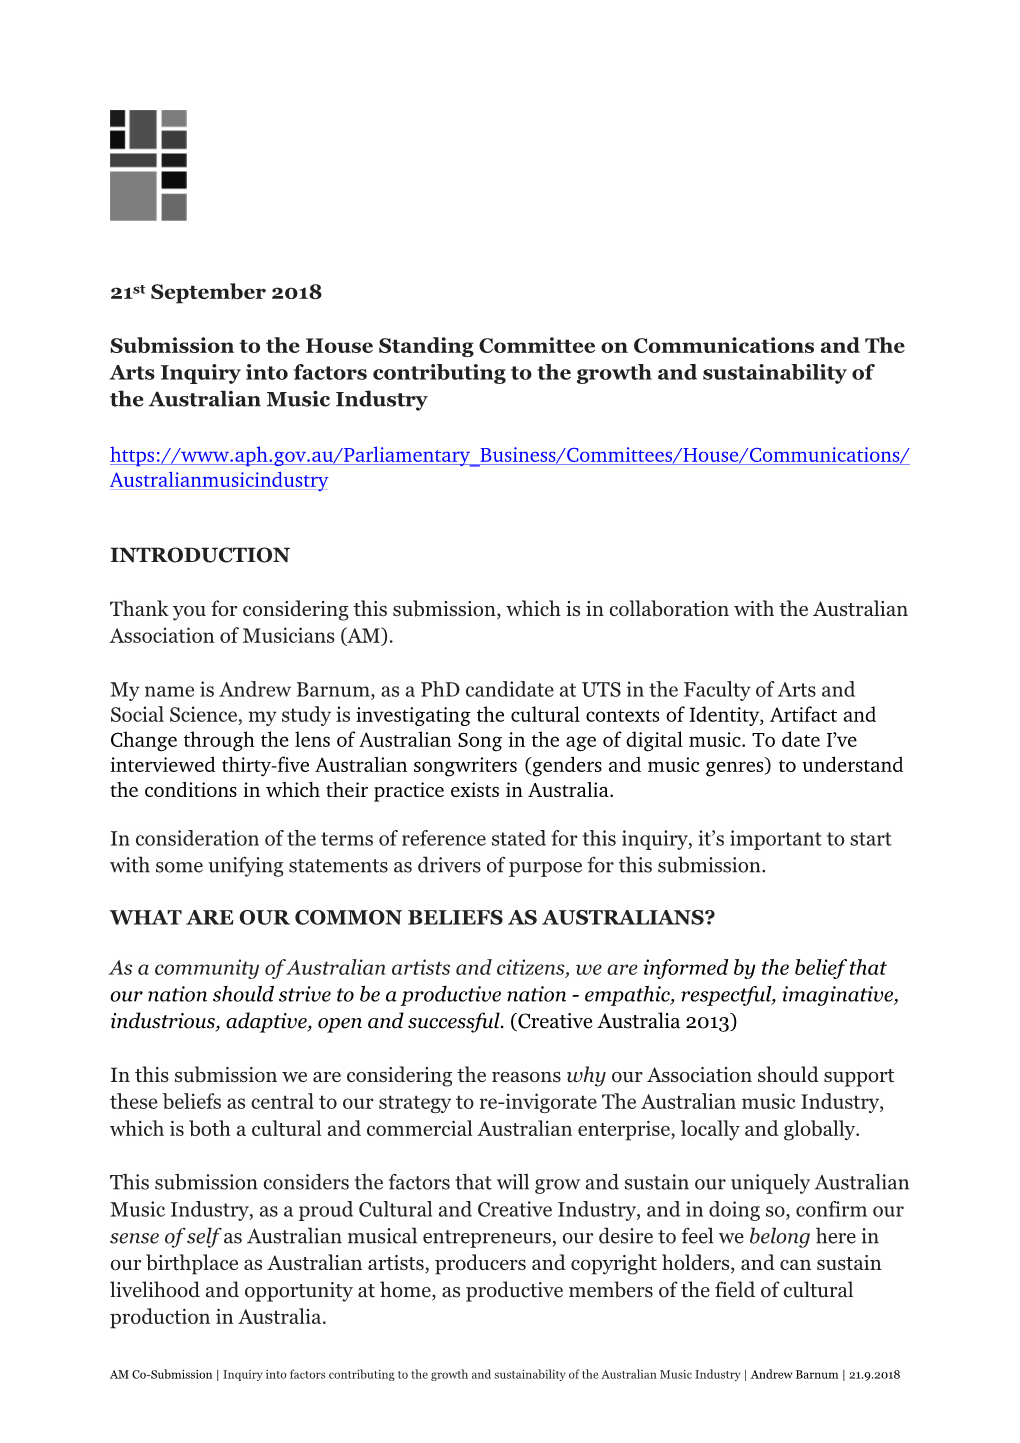 21St September 2018 Submission to the House Standing Committee on Communications and the Arts Inquiry Into Factors Contributing